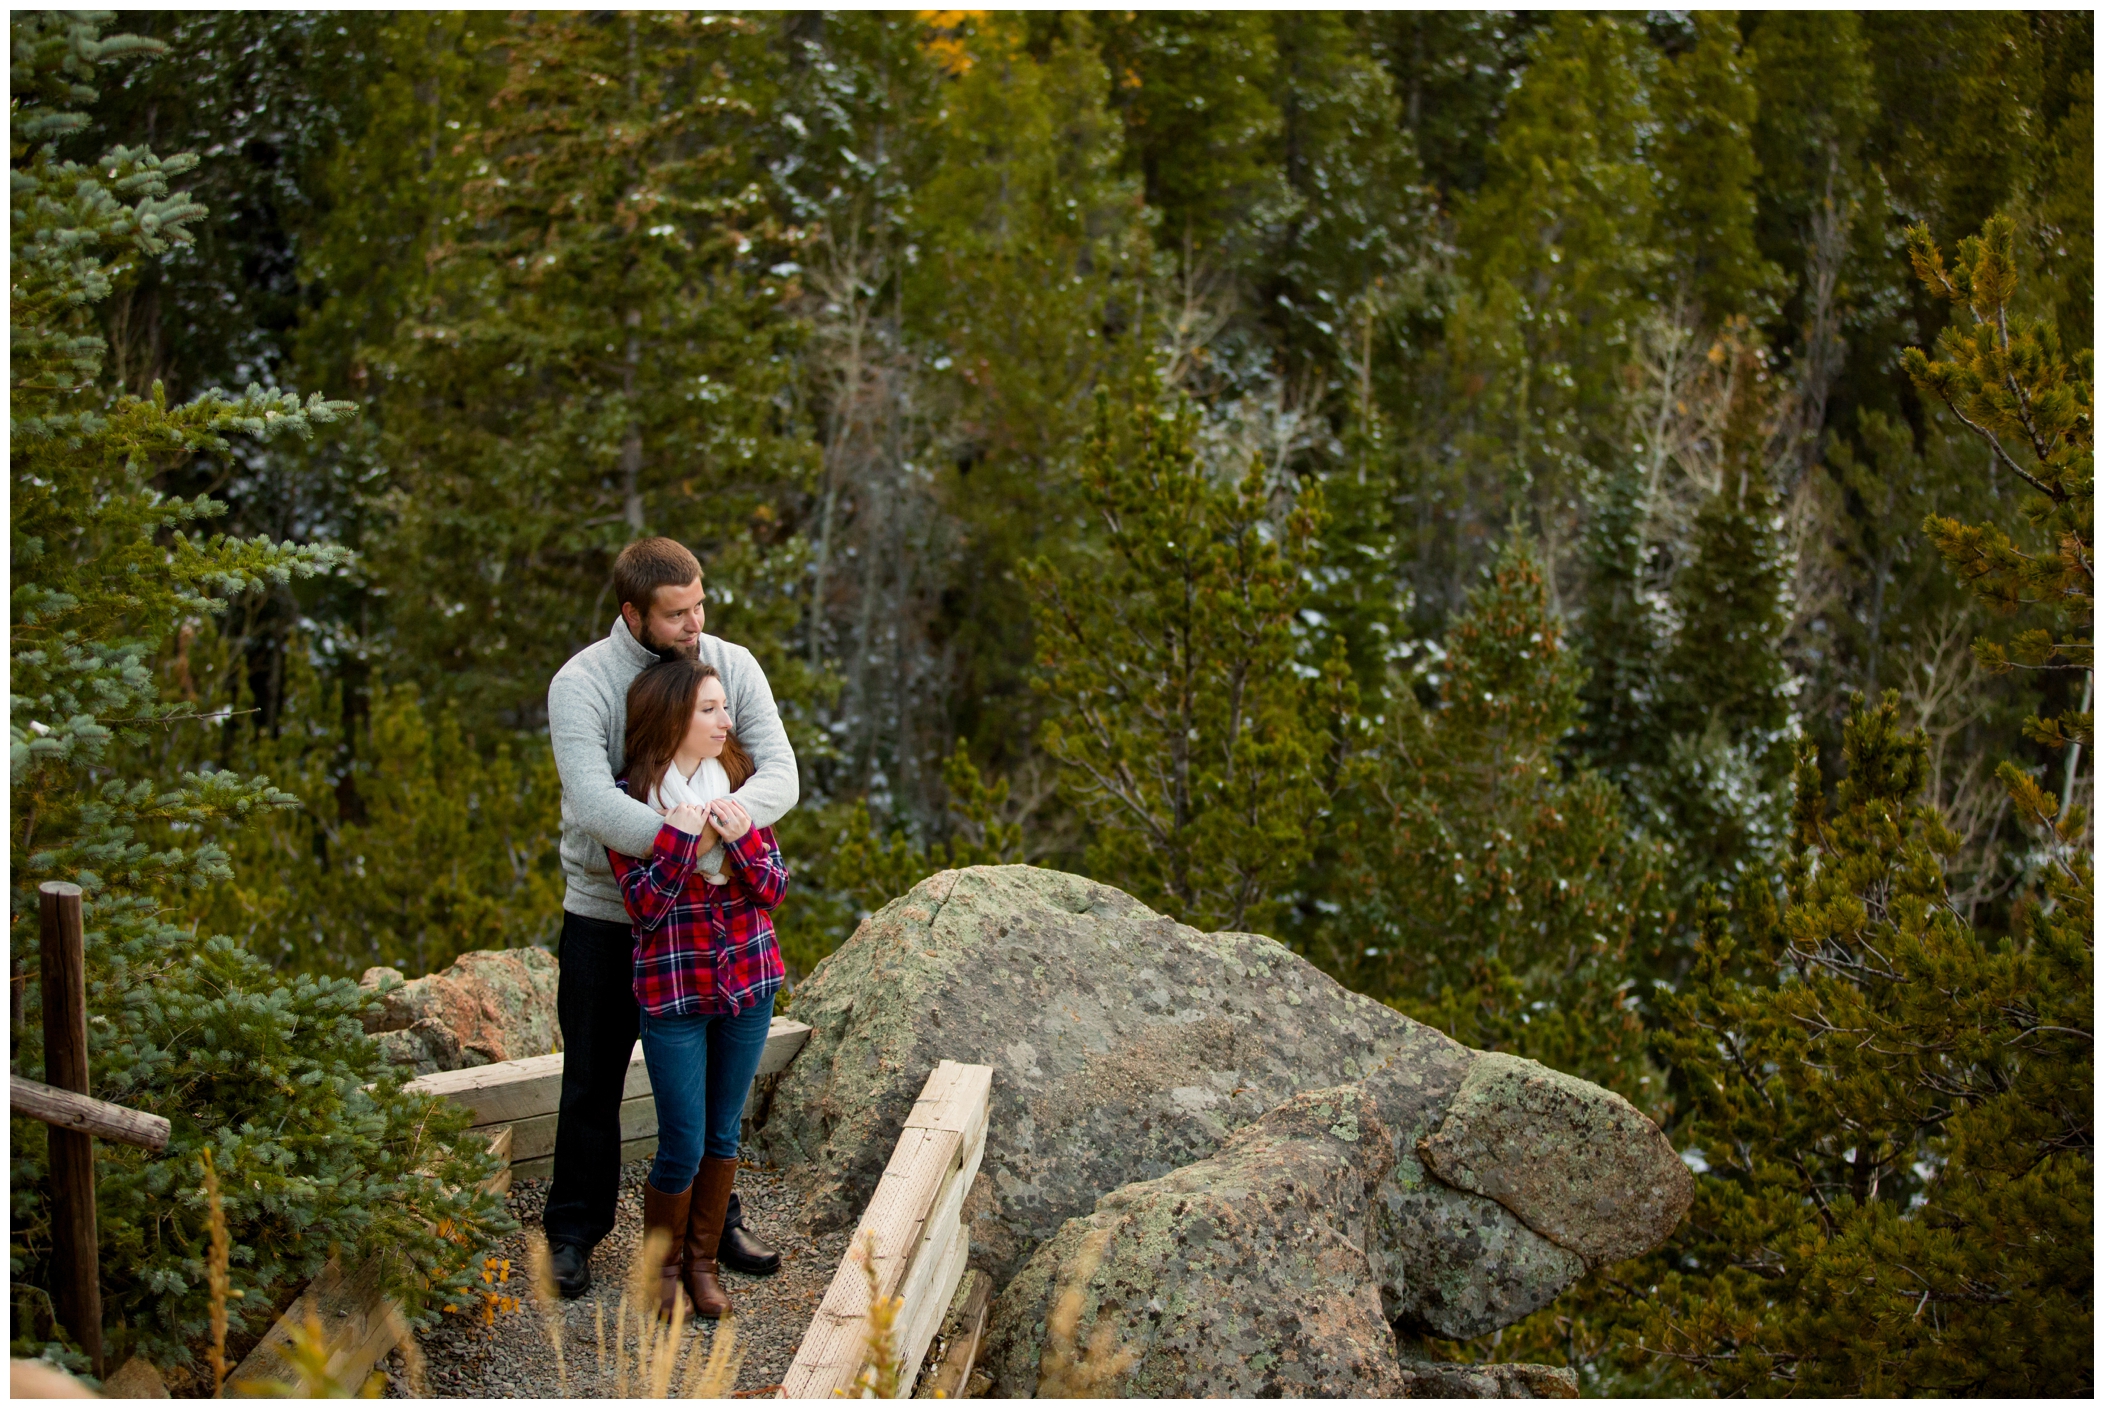 Colorado engagement photography at Peaceful Valley Ranch